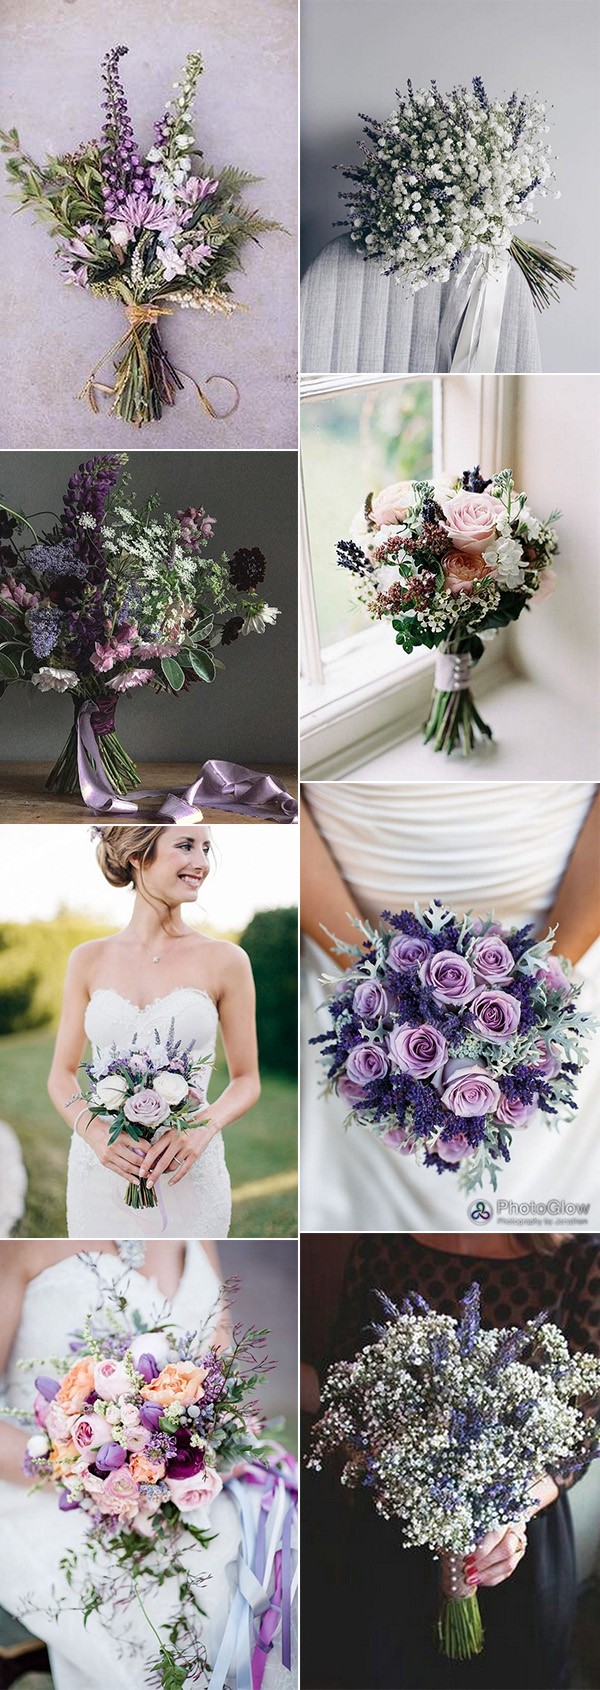 Lavender themed wedding bouquets for purple weddings